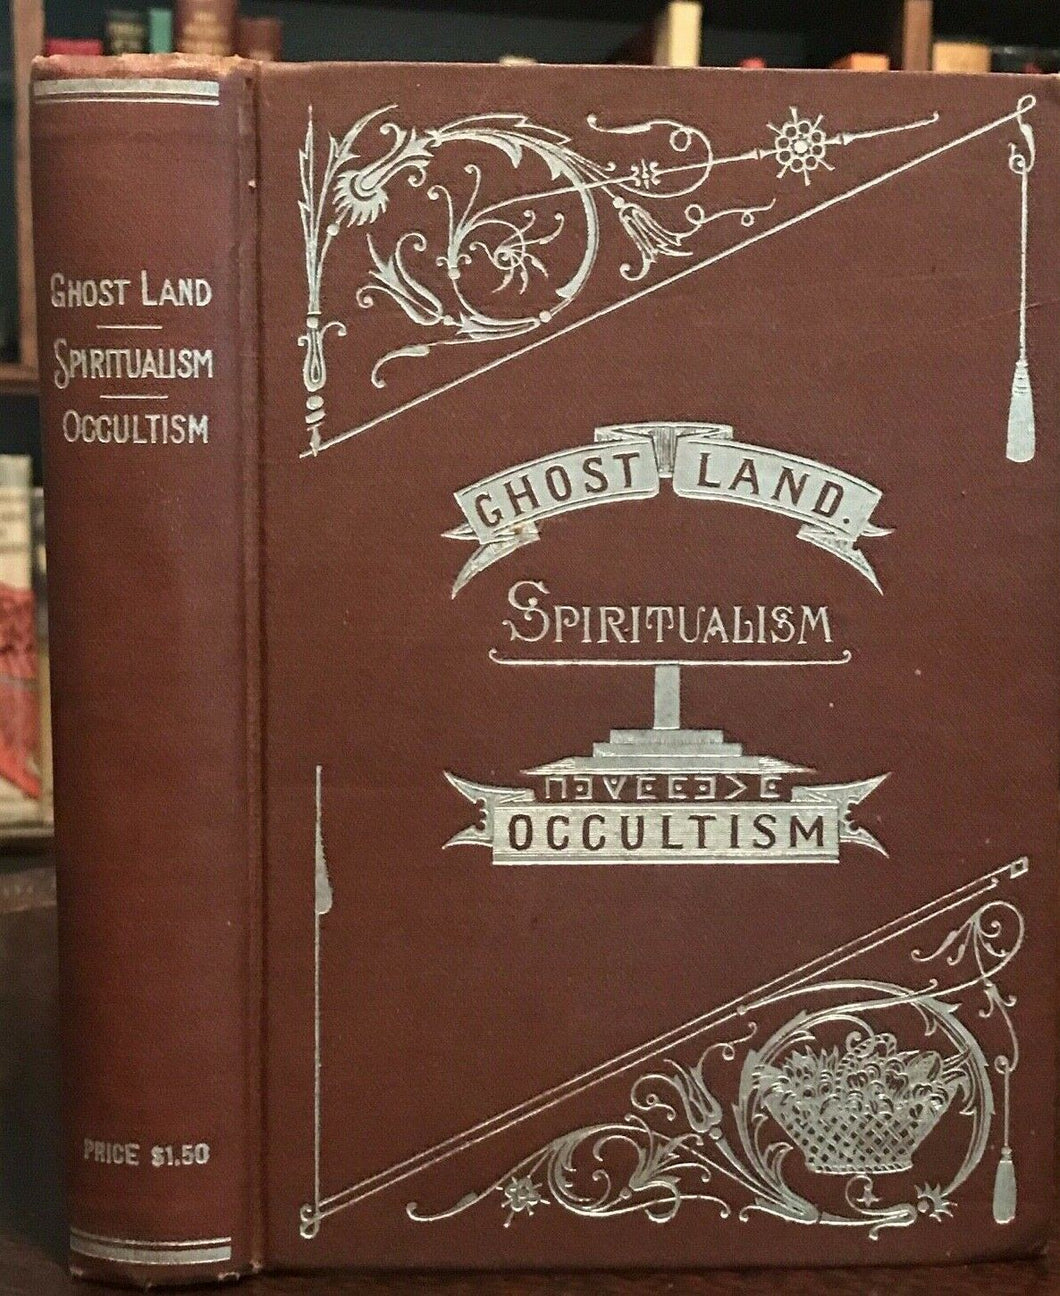 GHOST LAND or Researches into the Mysteries of Occultism - Britten, 1897 SPIRITS